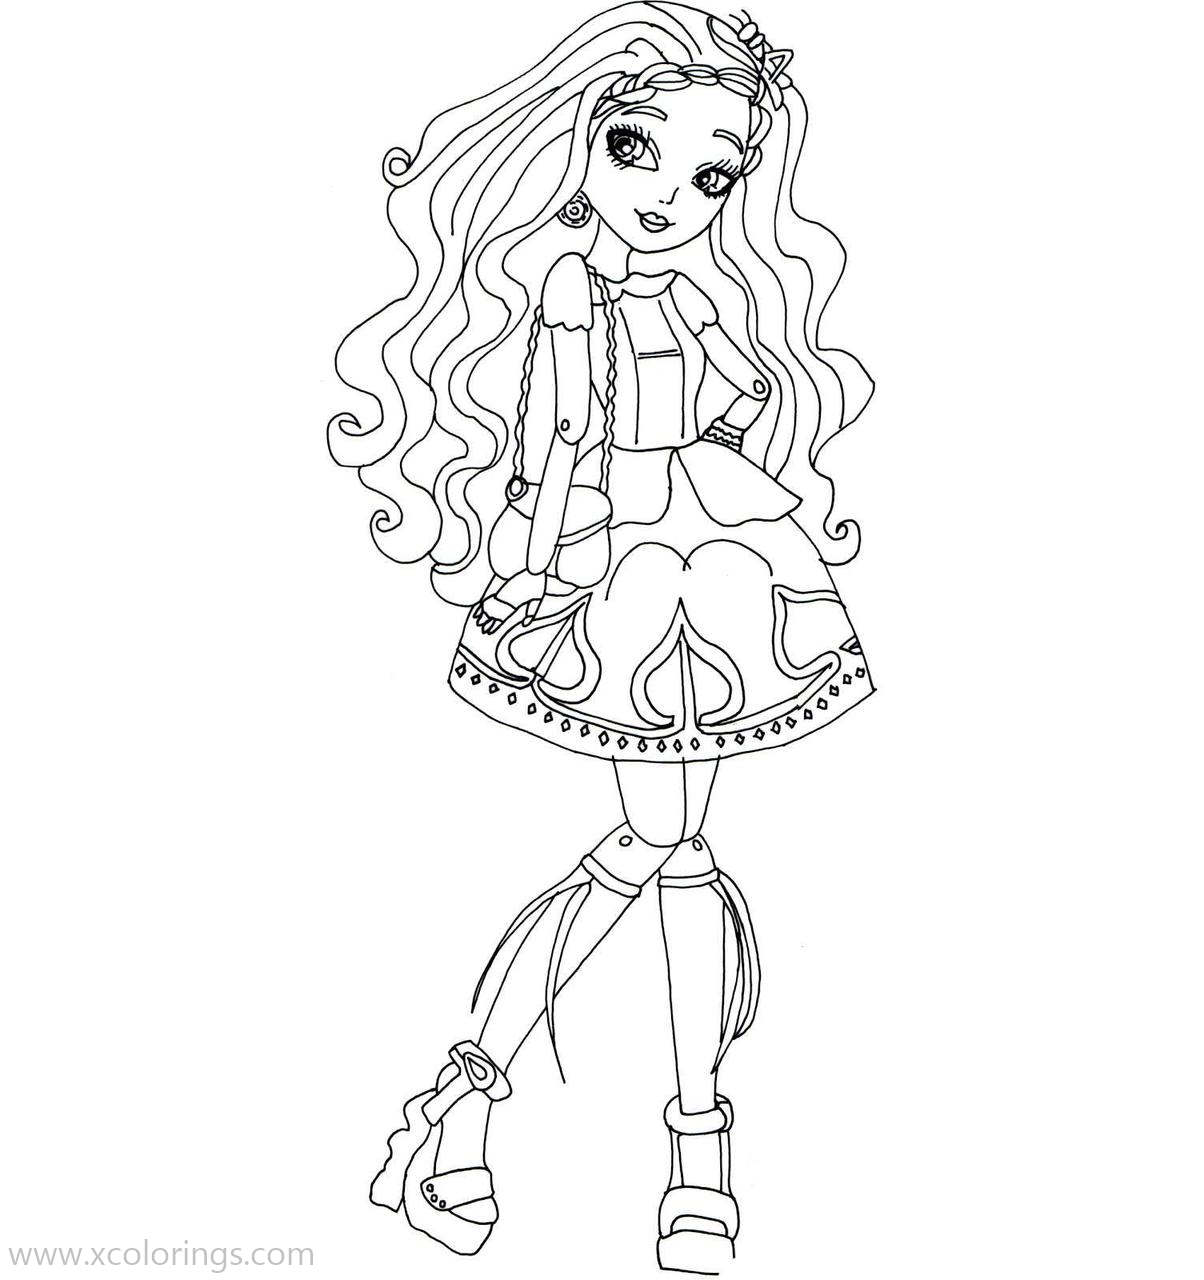 Free Ever After High Coloring Pages Cedar Wood printable